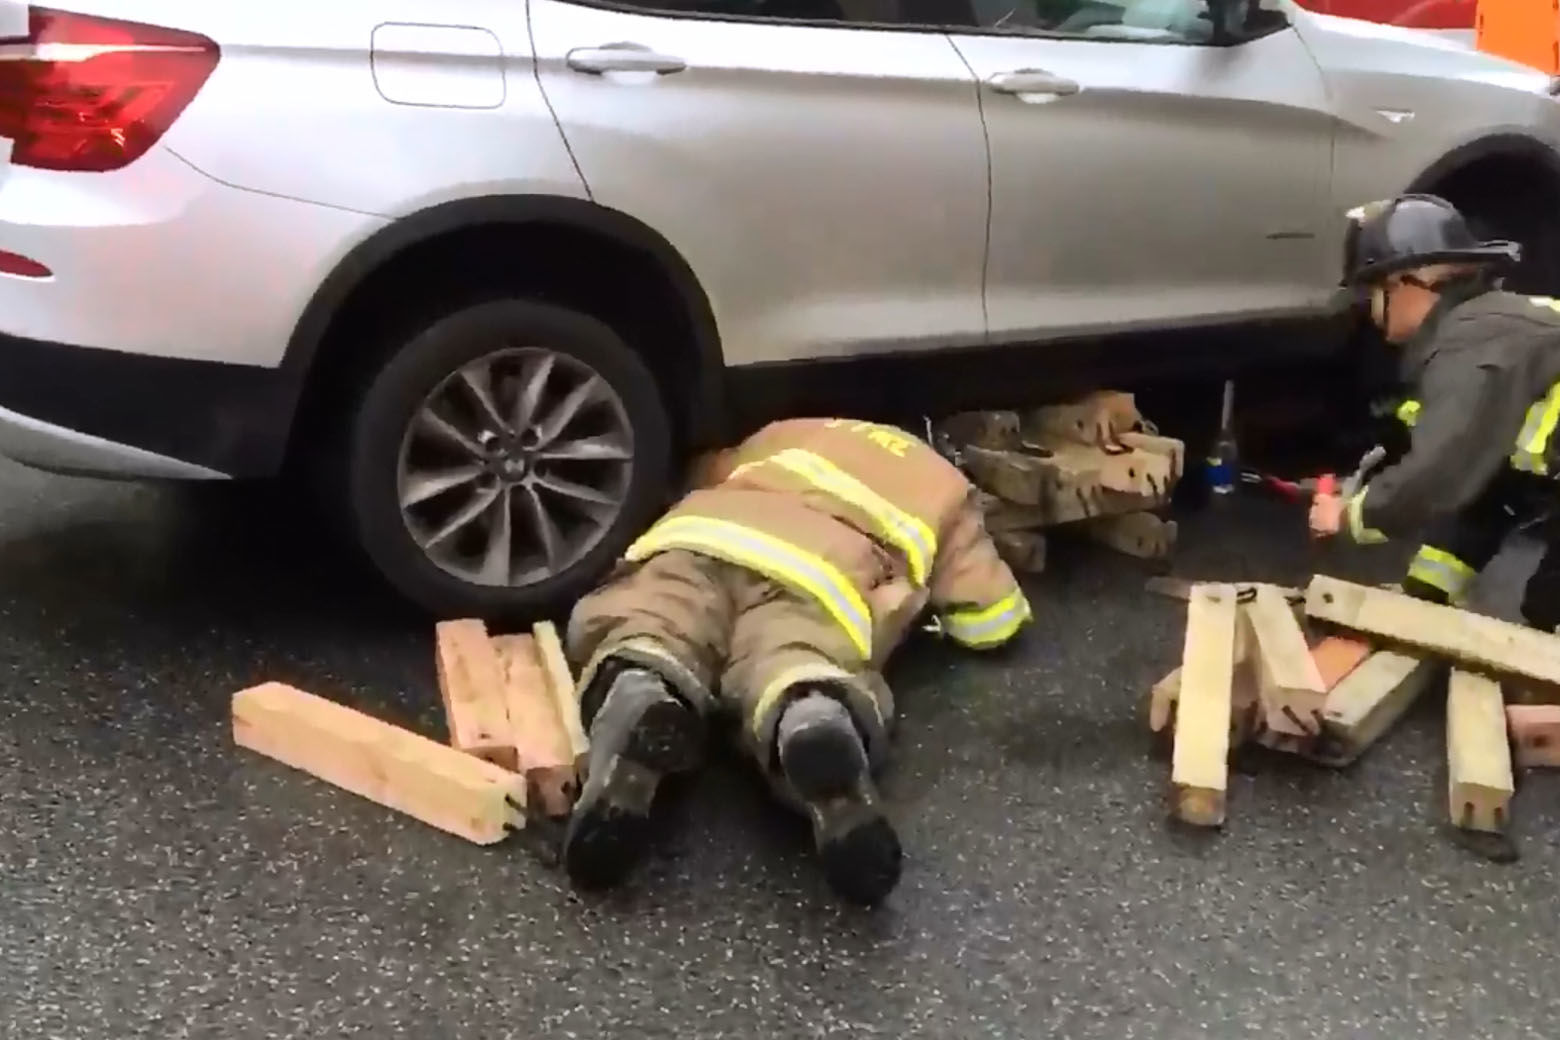 Videos tweeted by the D.C. Fire and EMS Service showed firefighters working to free the man who had become trapped under a silver SUV. (Courtesy D.C. Fire and EMS)